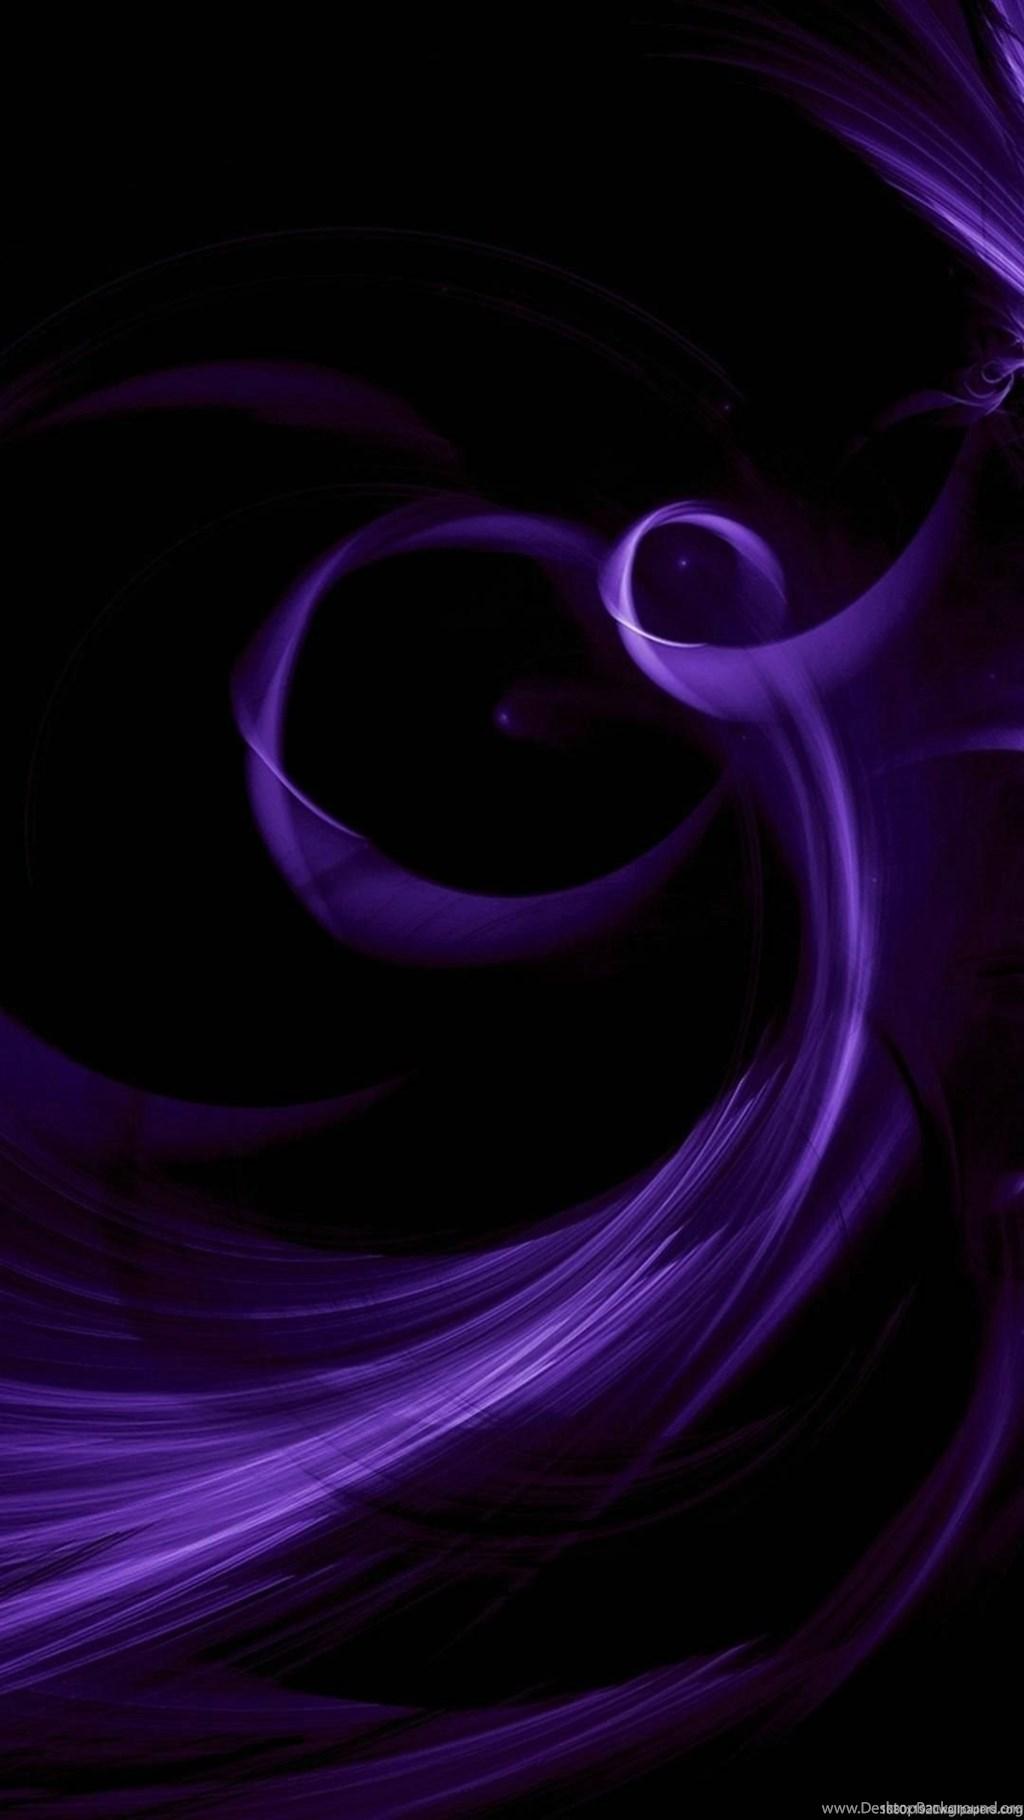 Black Purple Abstract Design Art Background Wallpaper Surface Backdrop  Stock Photo - Download Image Now - iStock